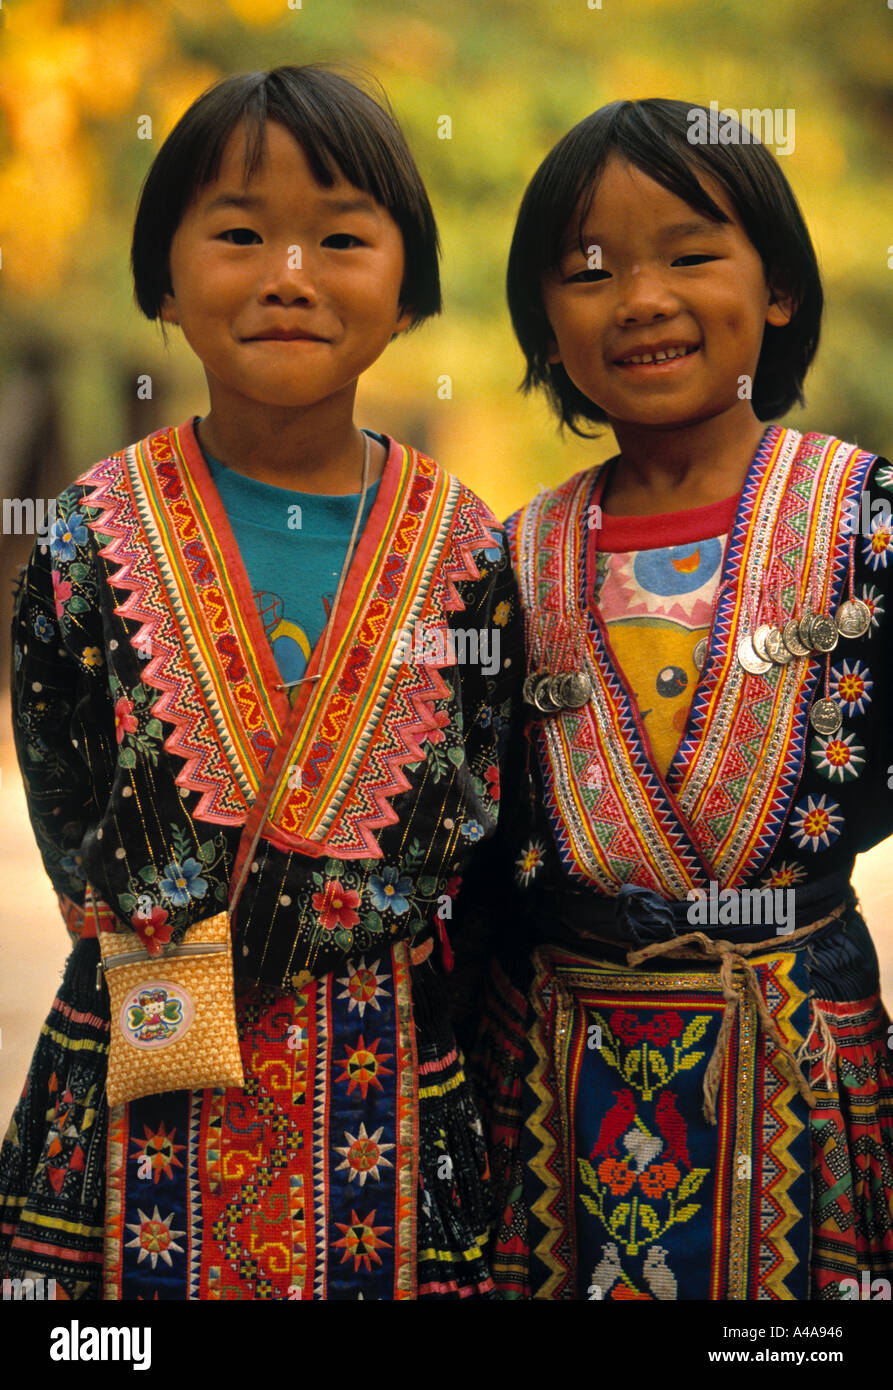 Hmong jpg hi-res stock photography and images picture